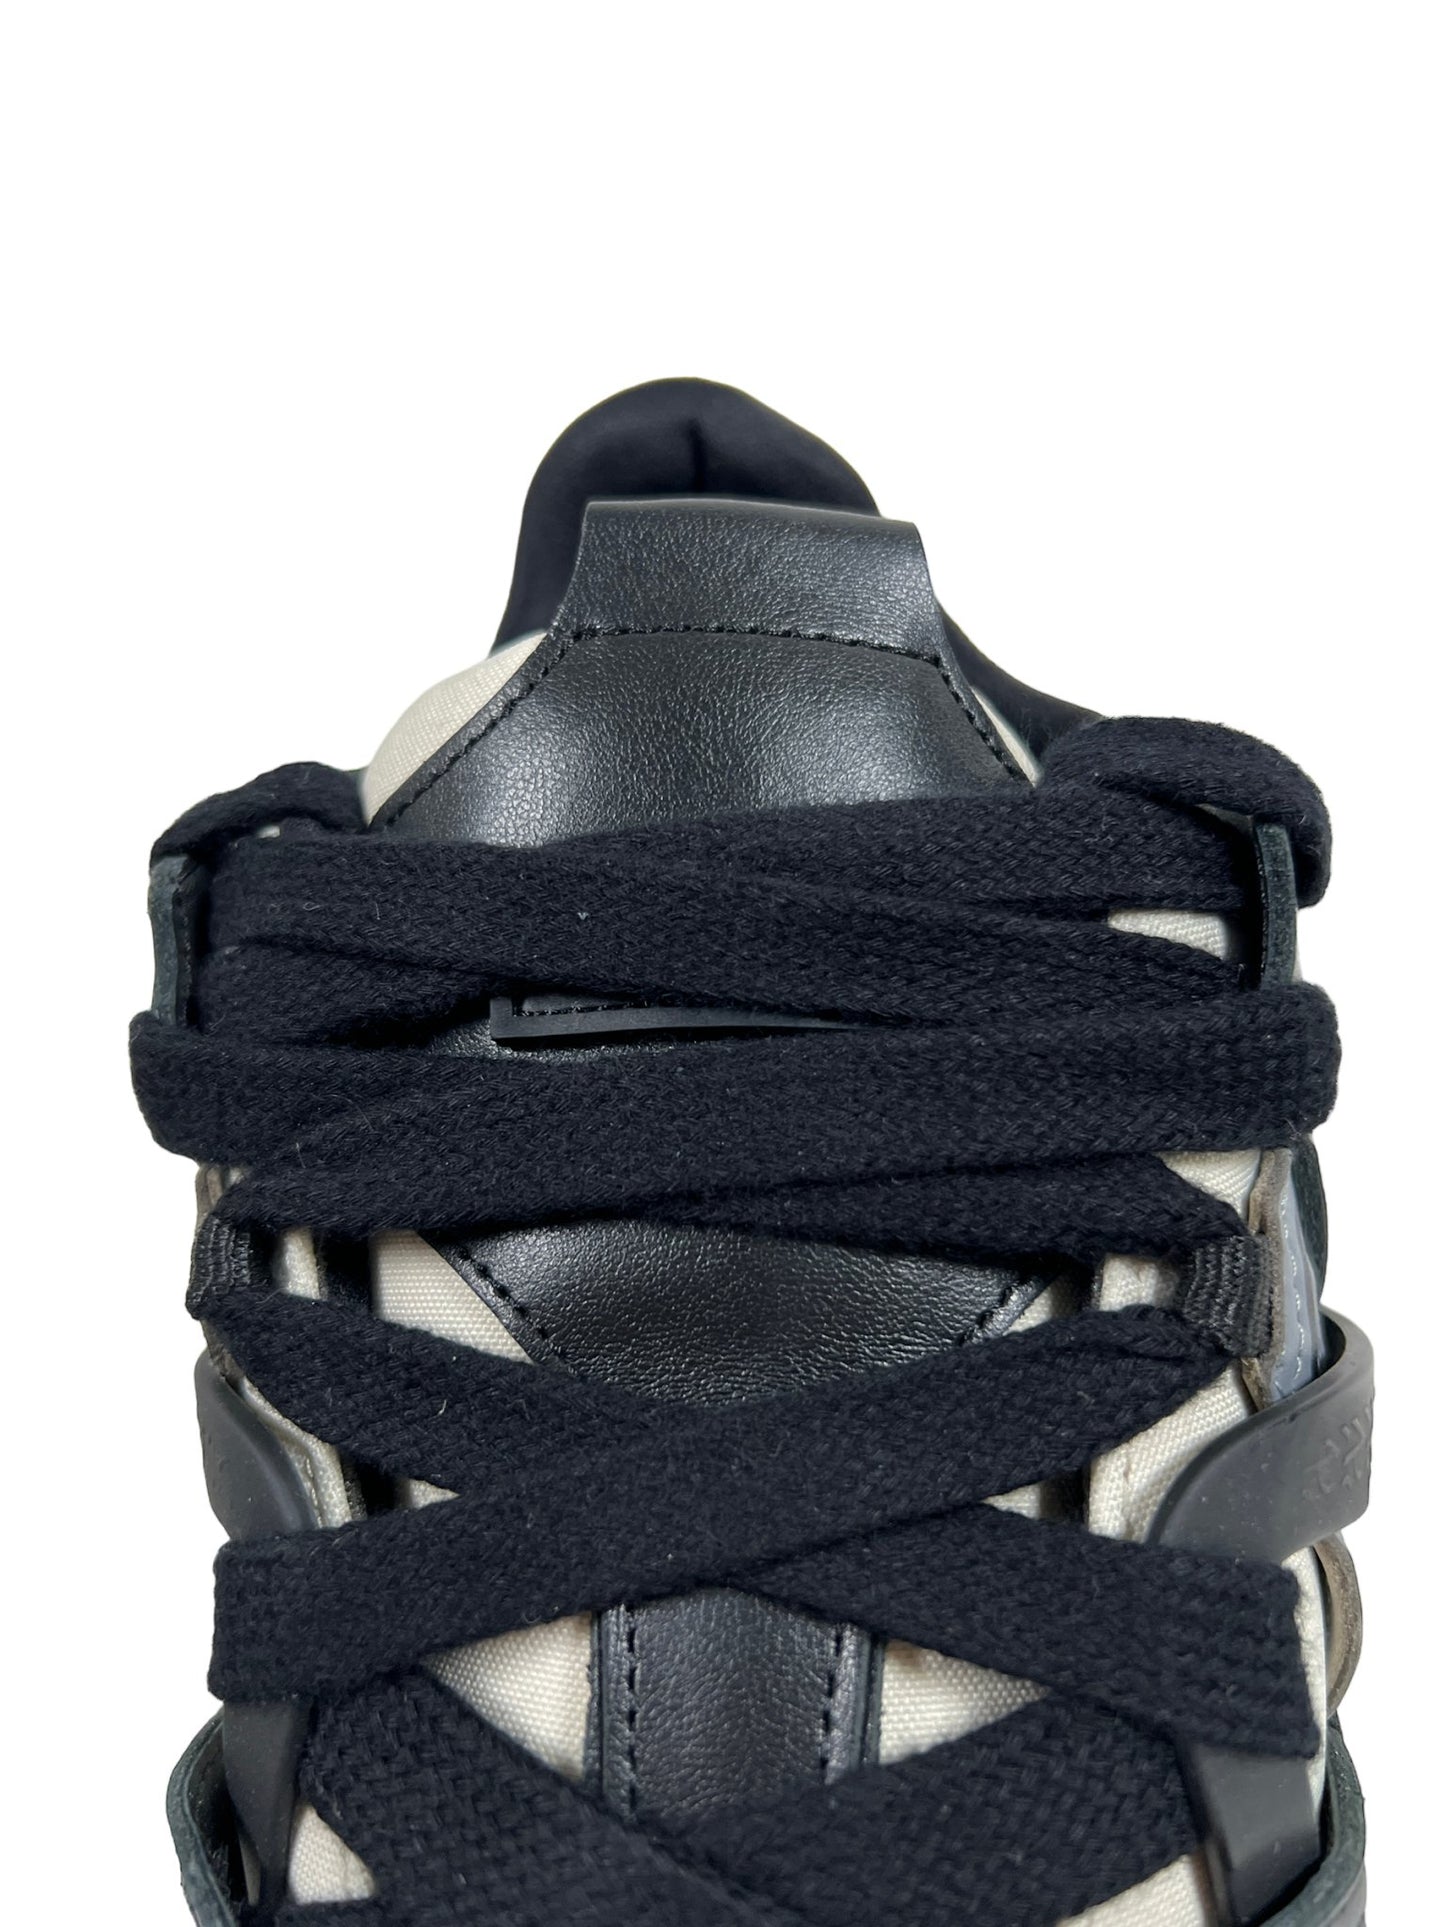 Close-up of a REPRESENT M12068-37 BULLY LEATHER BLACK sneaker with black leather detailing and ballistic nylon mesh upper, viewed from the front top, isolated on a white background.